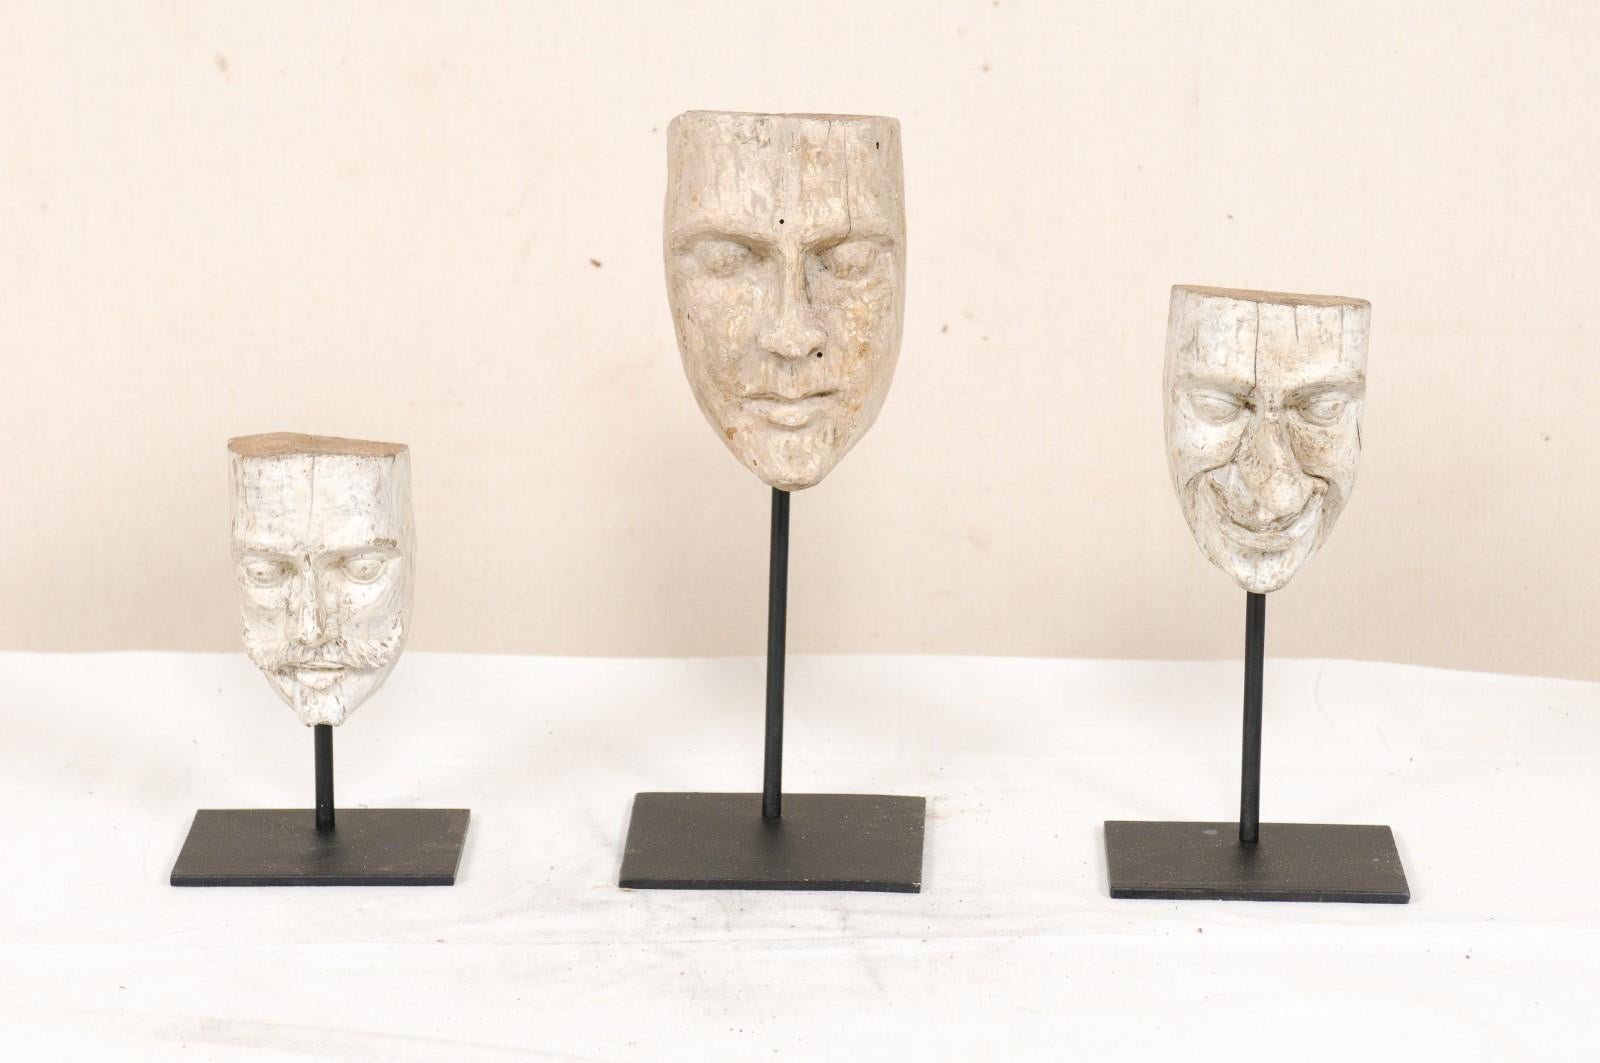 A set of three Ecuadorian wood-carved mask molds from the mid-20th century on custom stands. This collection of mask molds from Ecuador includes three individual molds, each varying in shape and size; one with an overly pronounced nose, another with